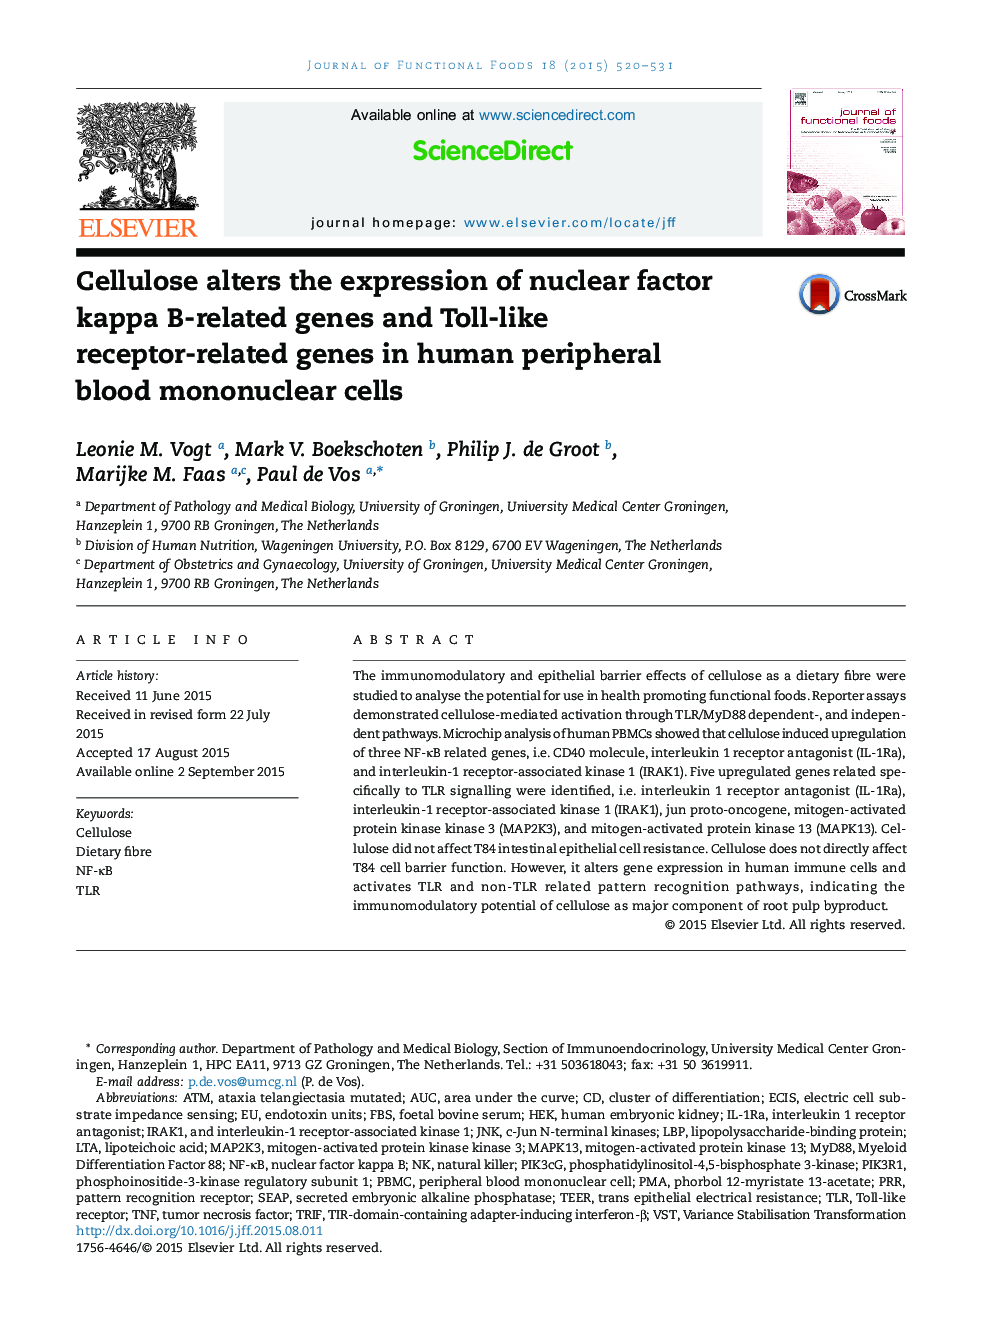 Cellulose alters the expression of nuclear factor kappa B-related genes and Toll-like receptor-related genes in human peripheral blood mononuclear cells